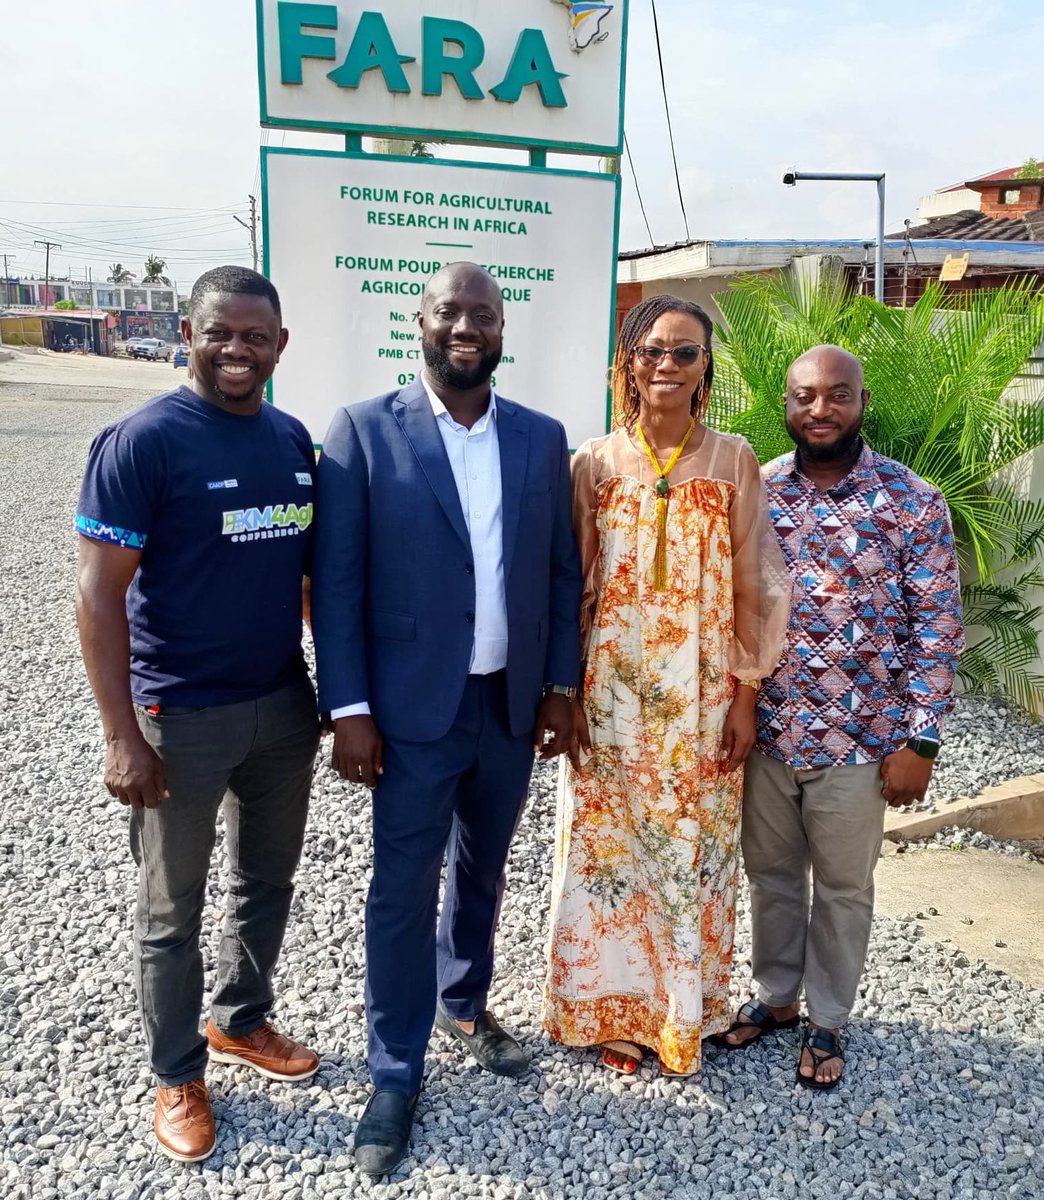 FARA's Knowledge Management Team hosted @CORAFNews Representatives for a week long Knowledge Exchange and Benchmarking mission to learn about FARA’s knowledge management system as part of the #CAADPxP4 Programme implementation

Read article⬇️
bit.ly/45ehg9f
#KM4AgD #AR4D